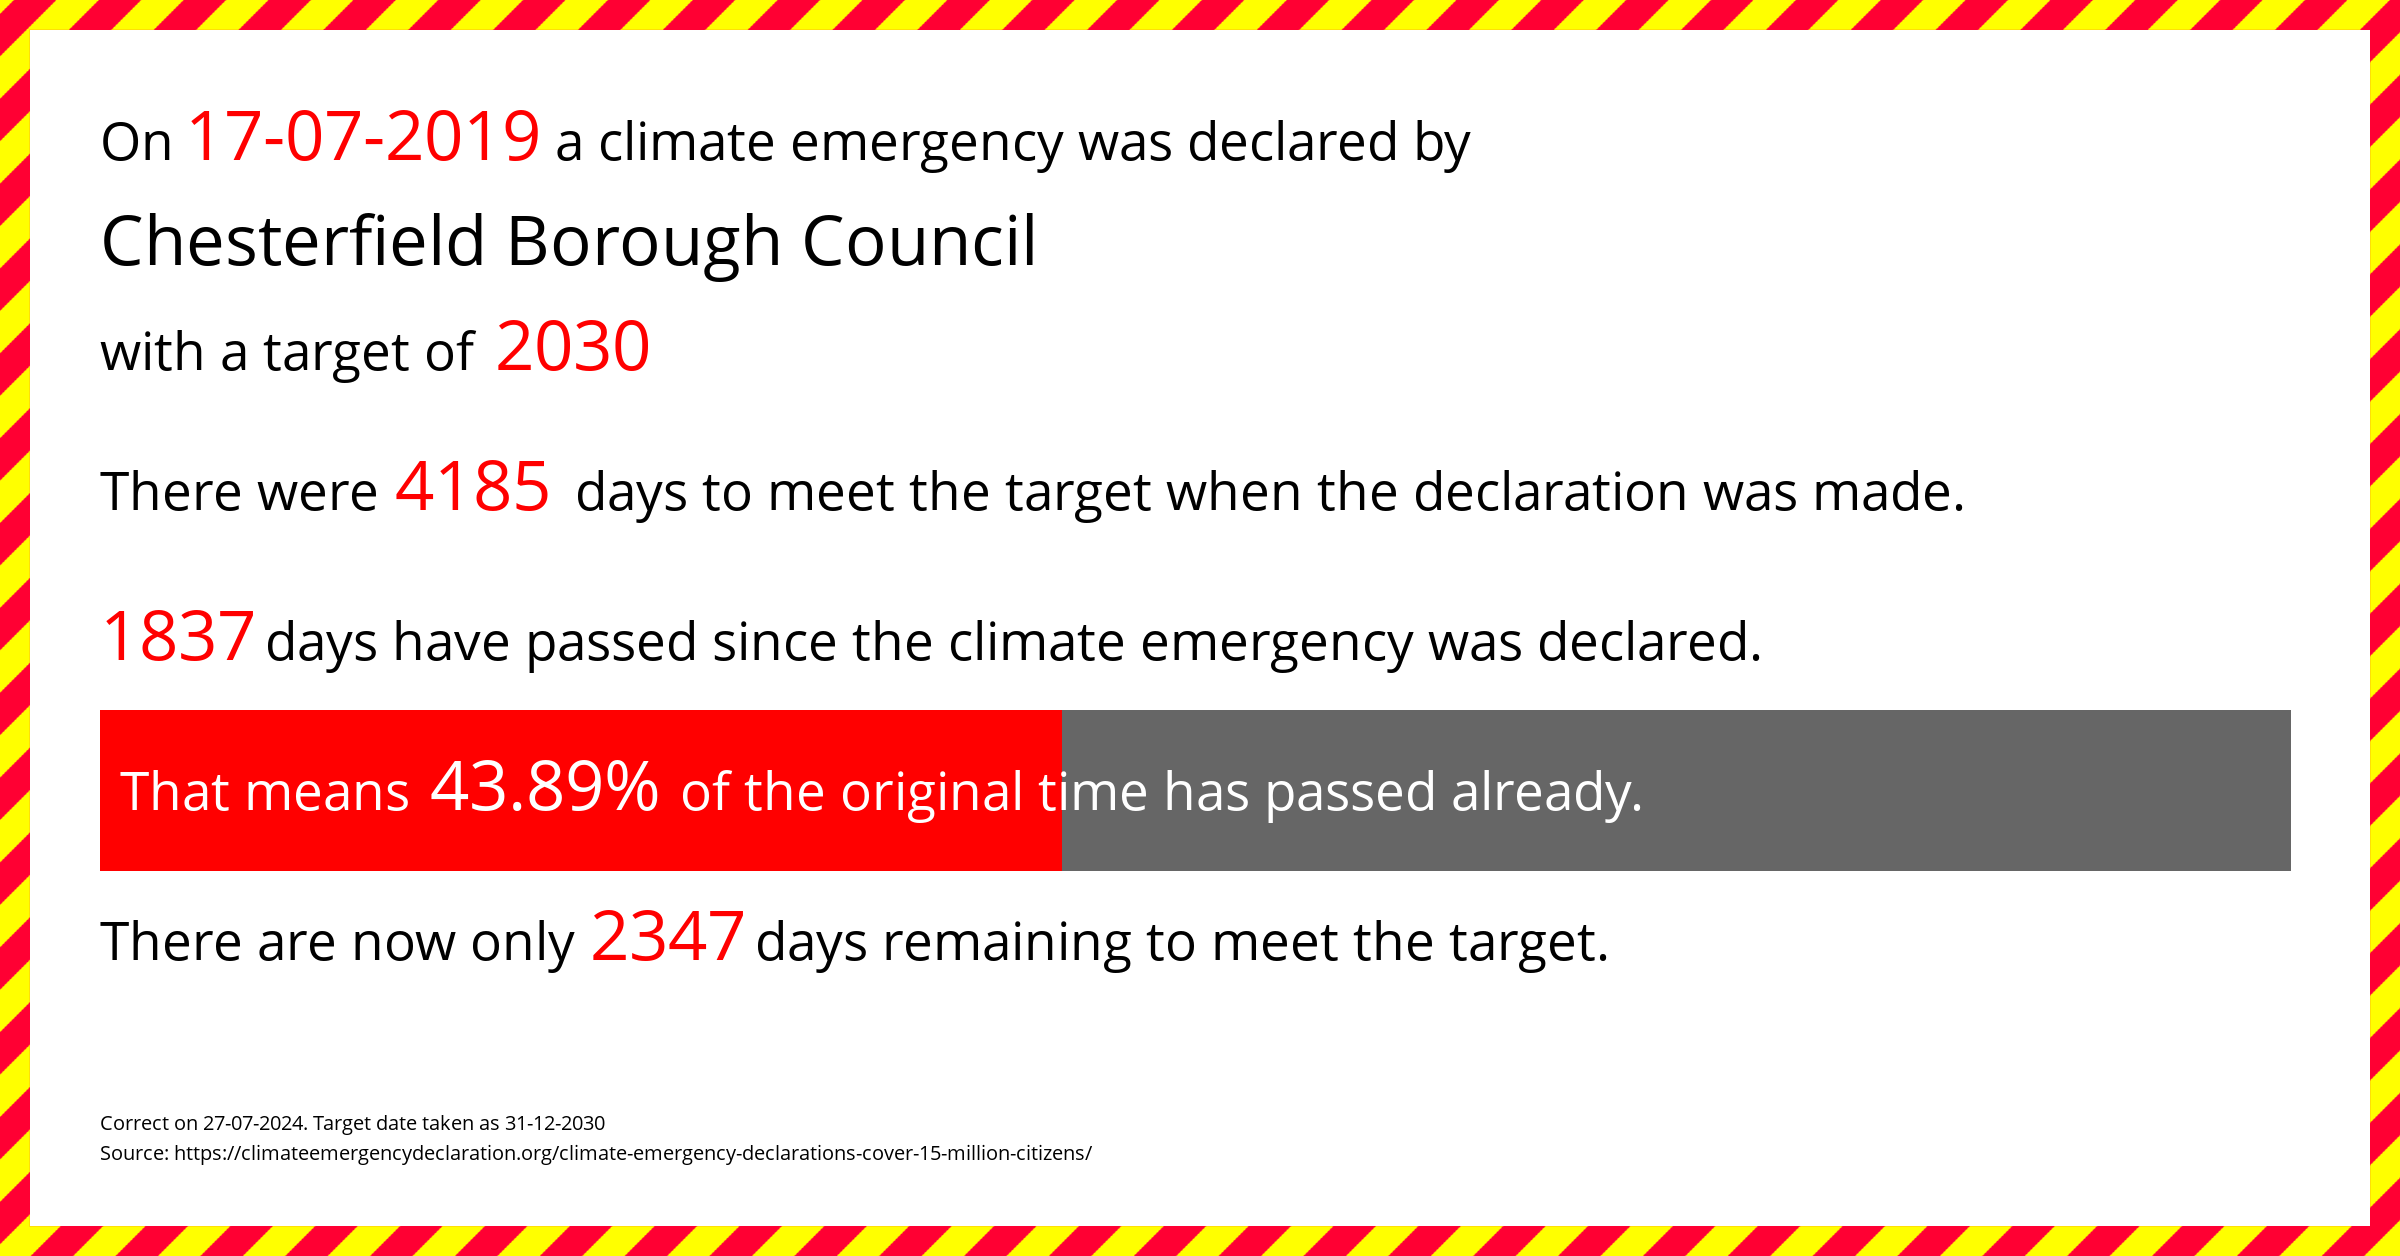 Chesterfield Borough Council declared a Climate emergency on Wednesday 17th July 2019, with a target of 2030.